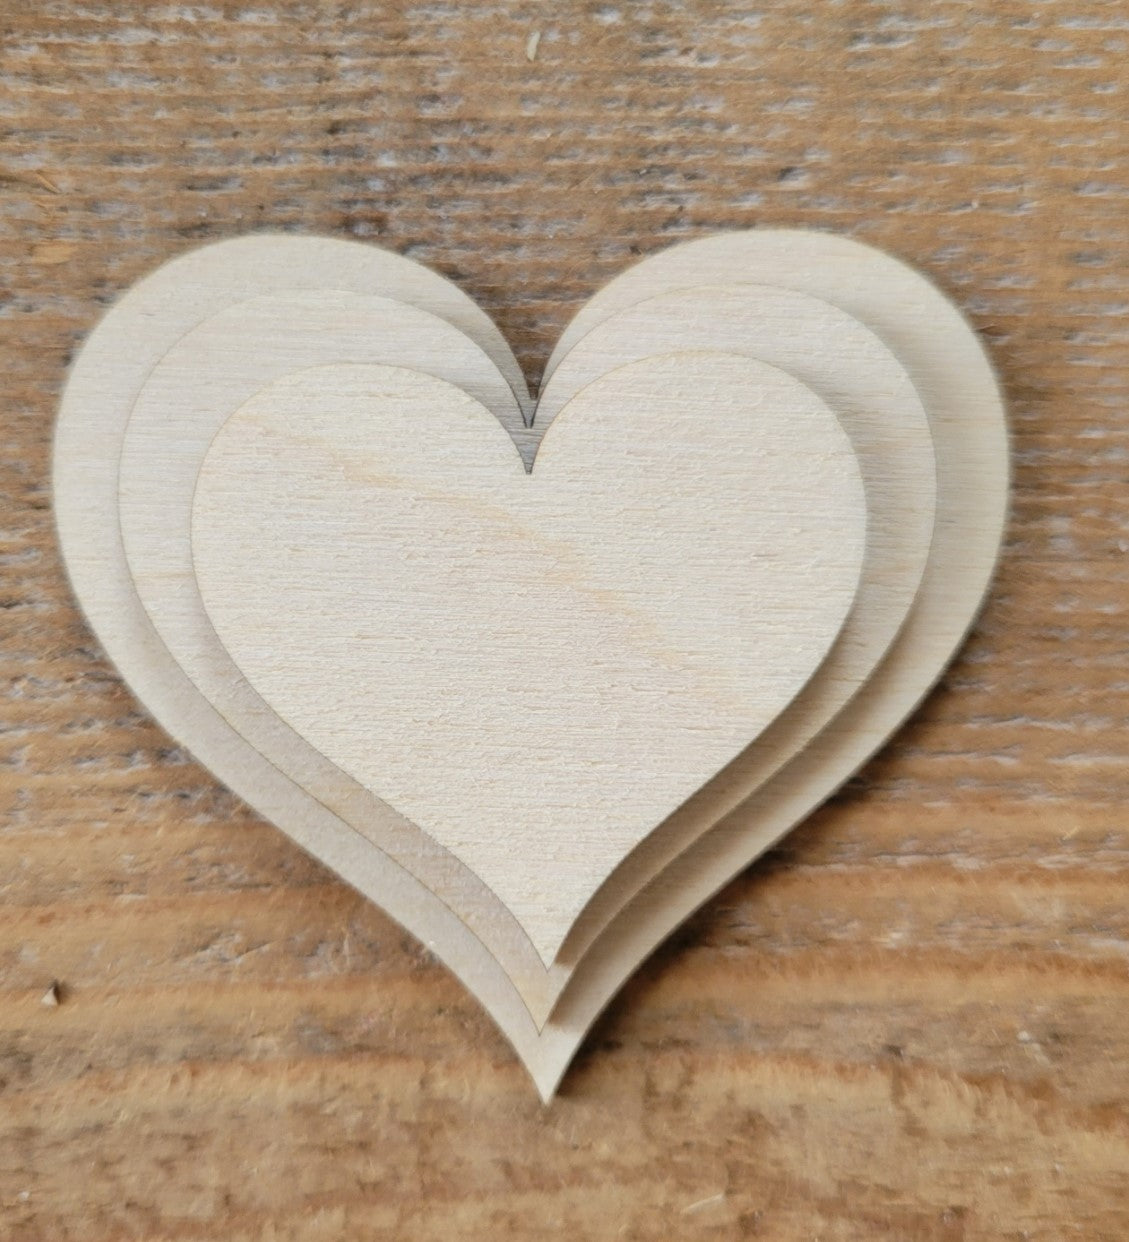 Wooden Heart Cut Outs